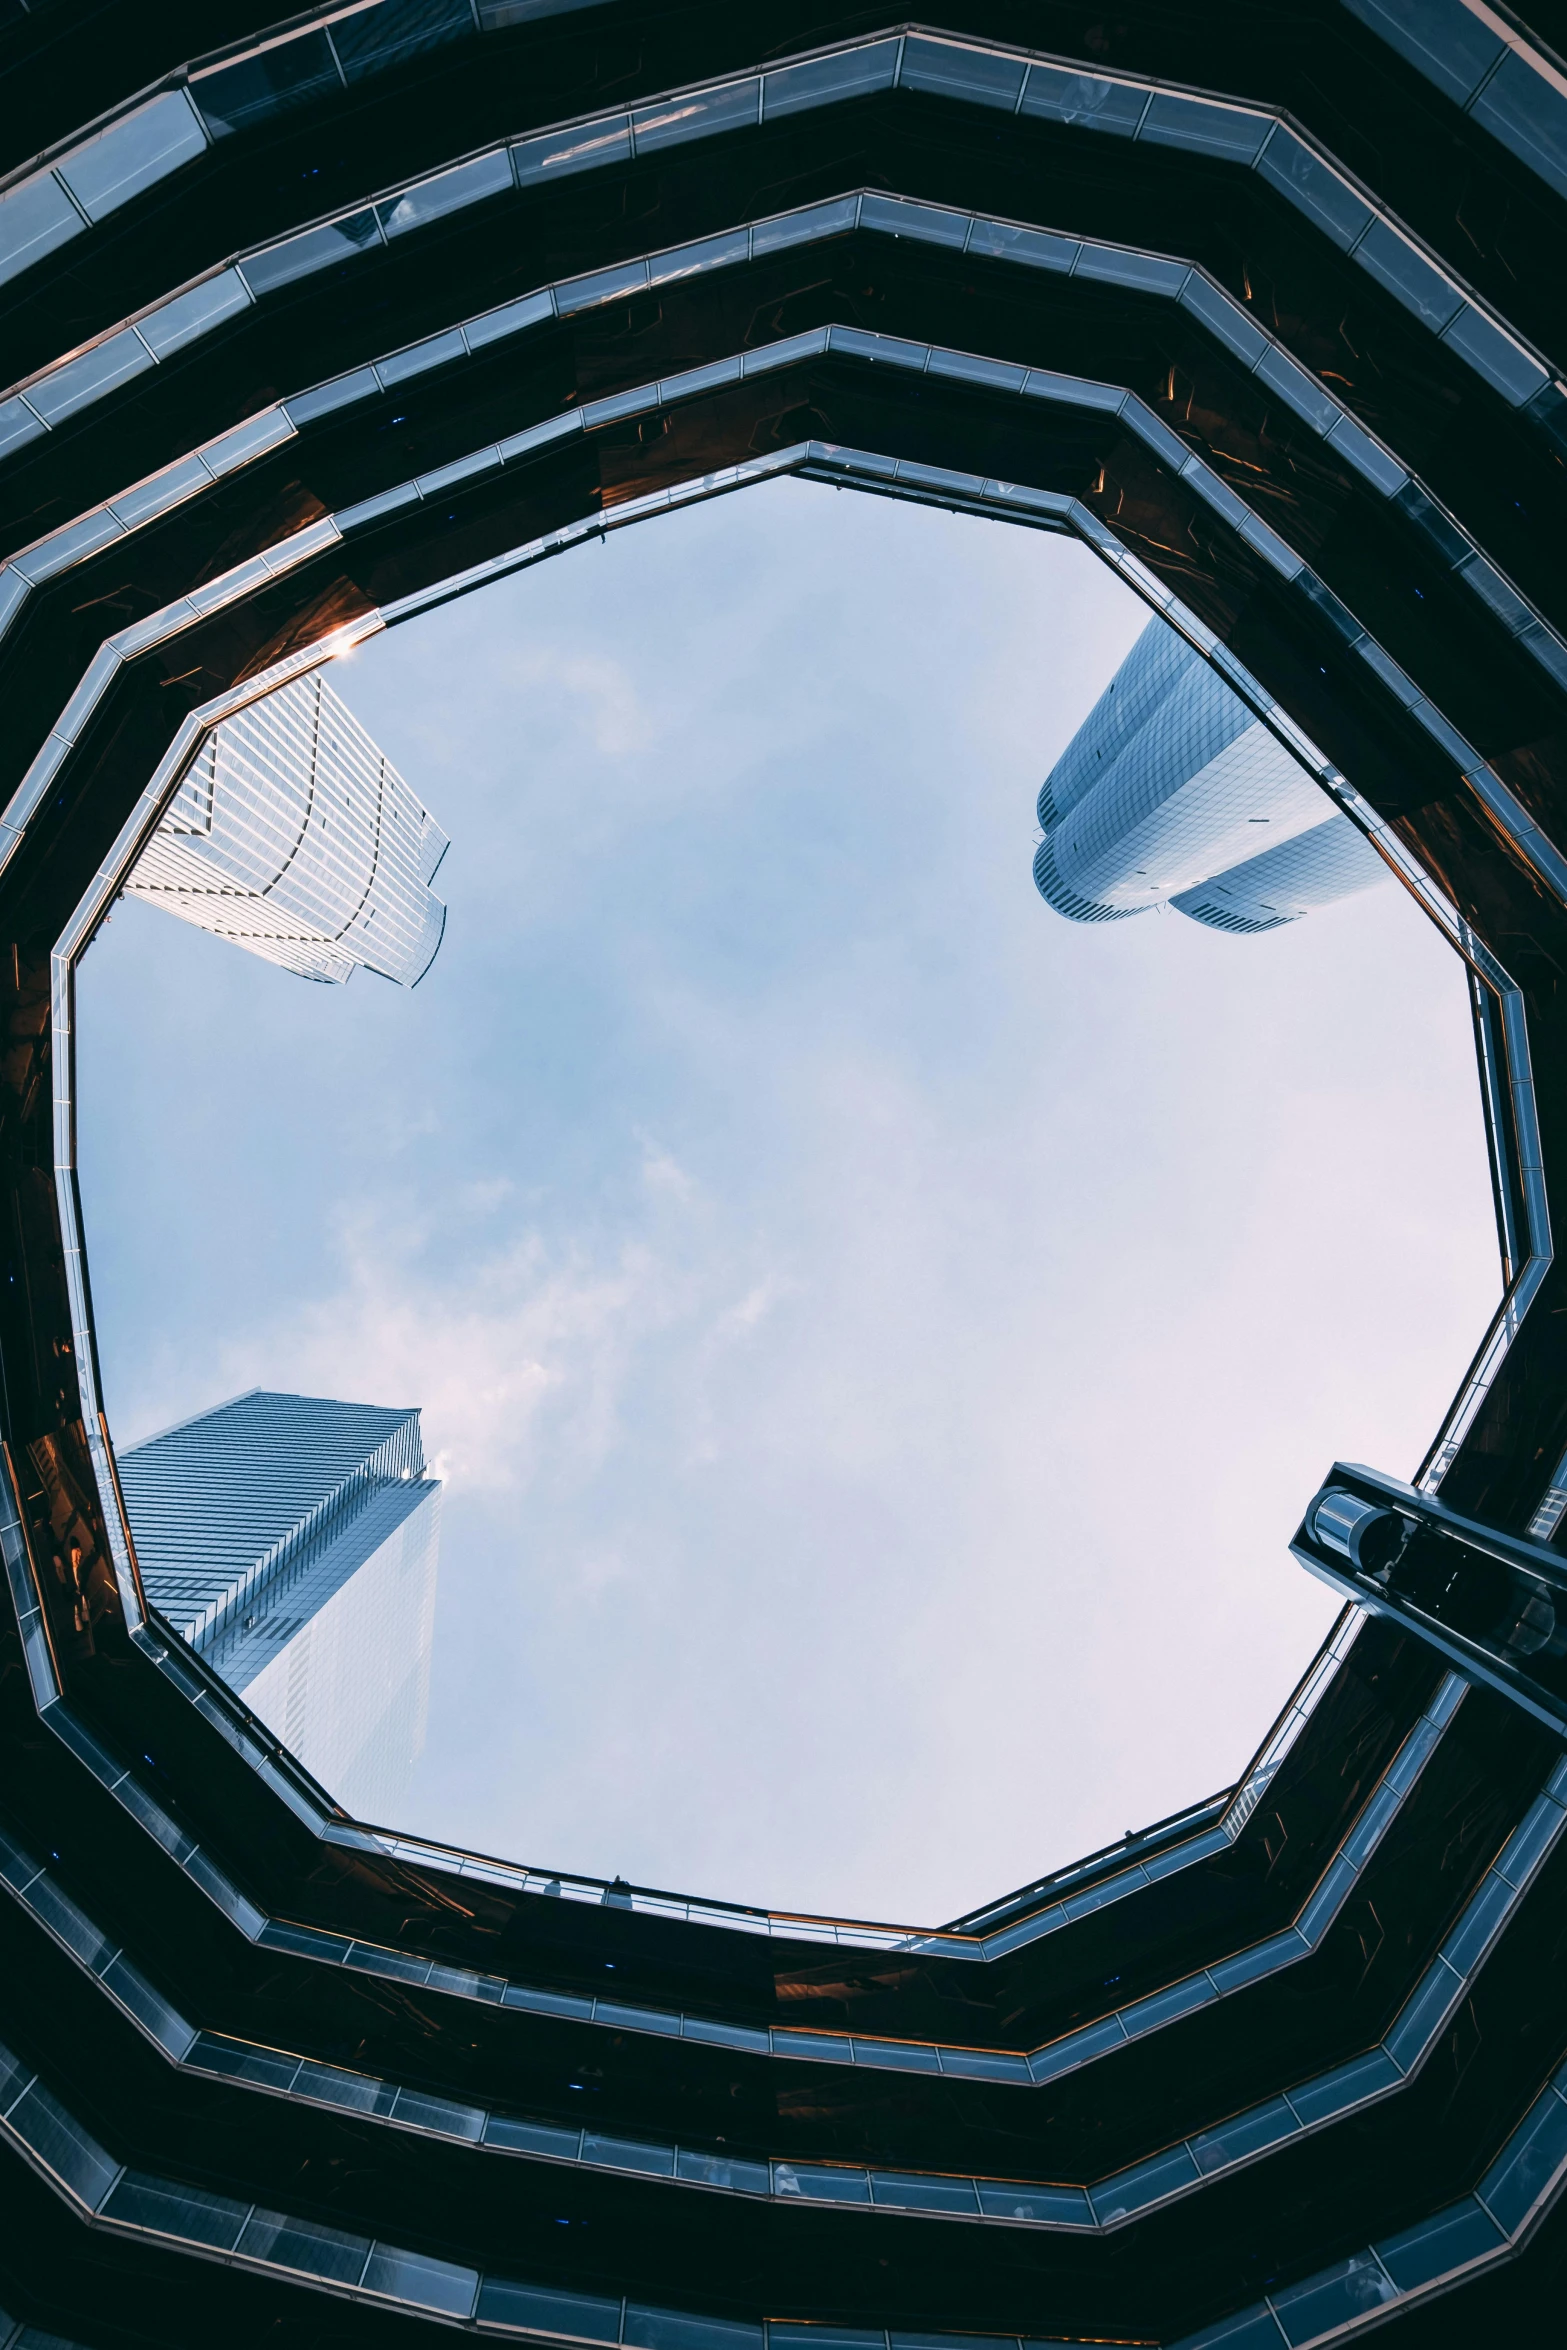 looking up at a futuristic, futuristic, circular building with sky reflected in the glass windows